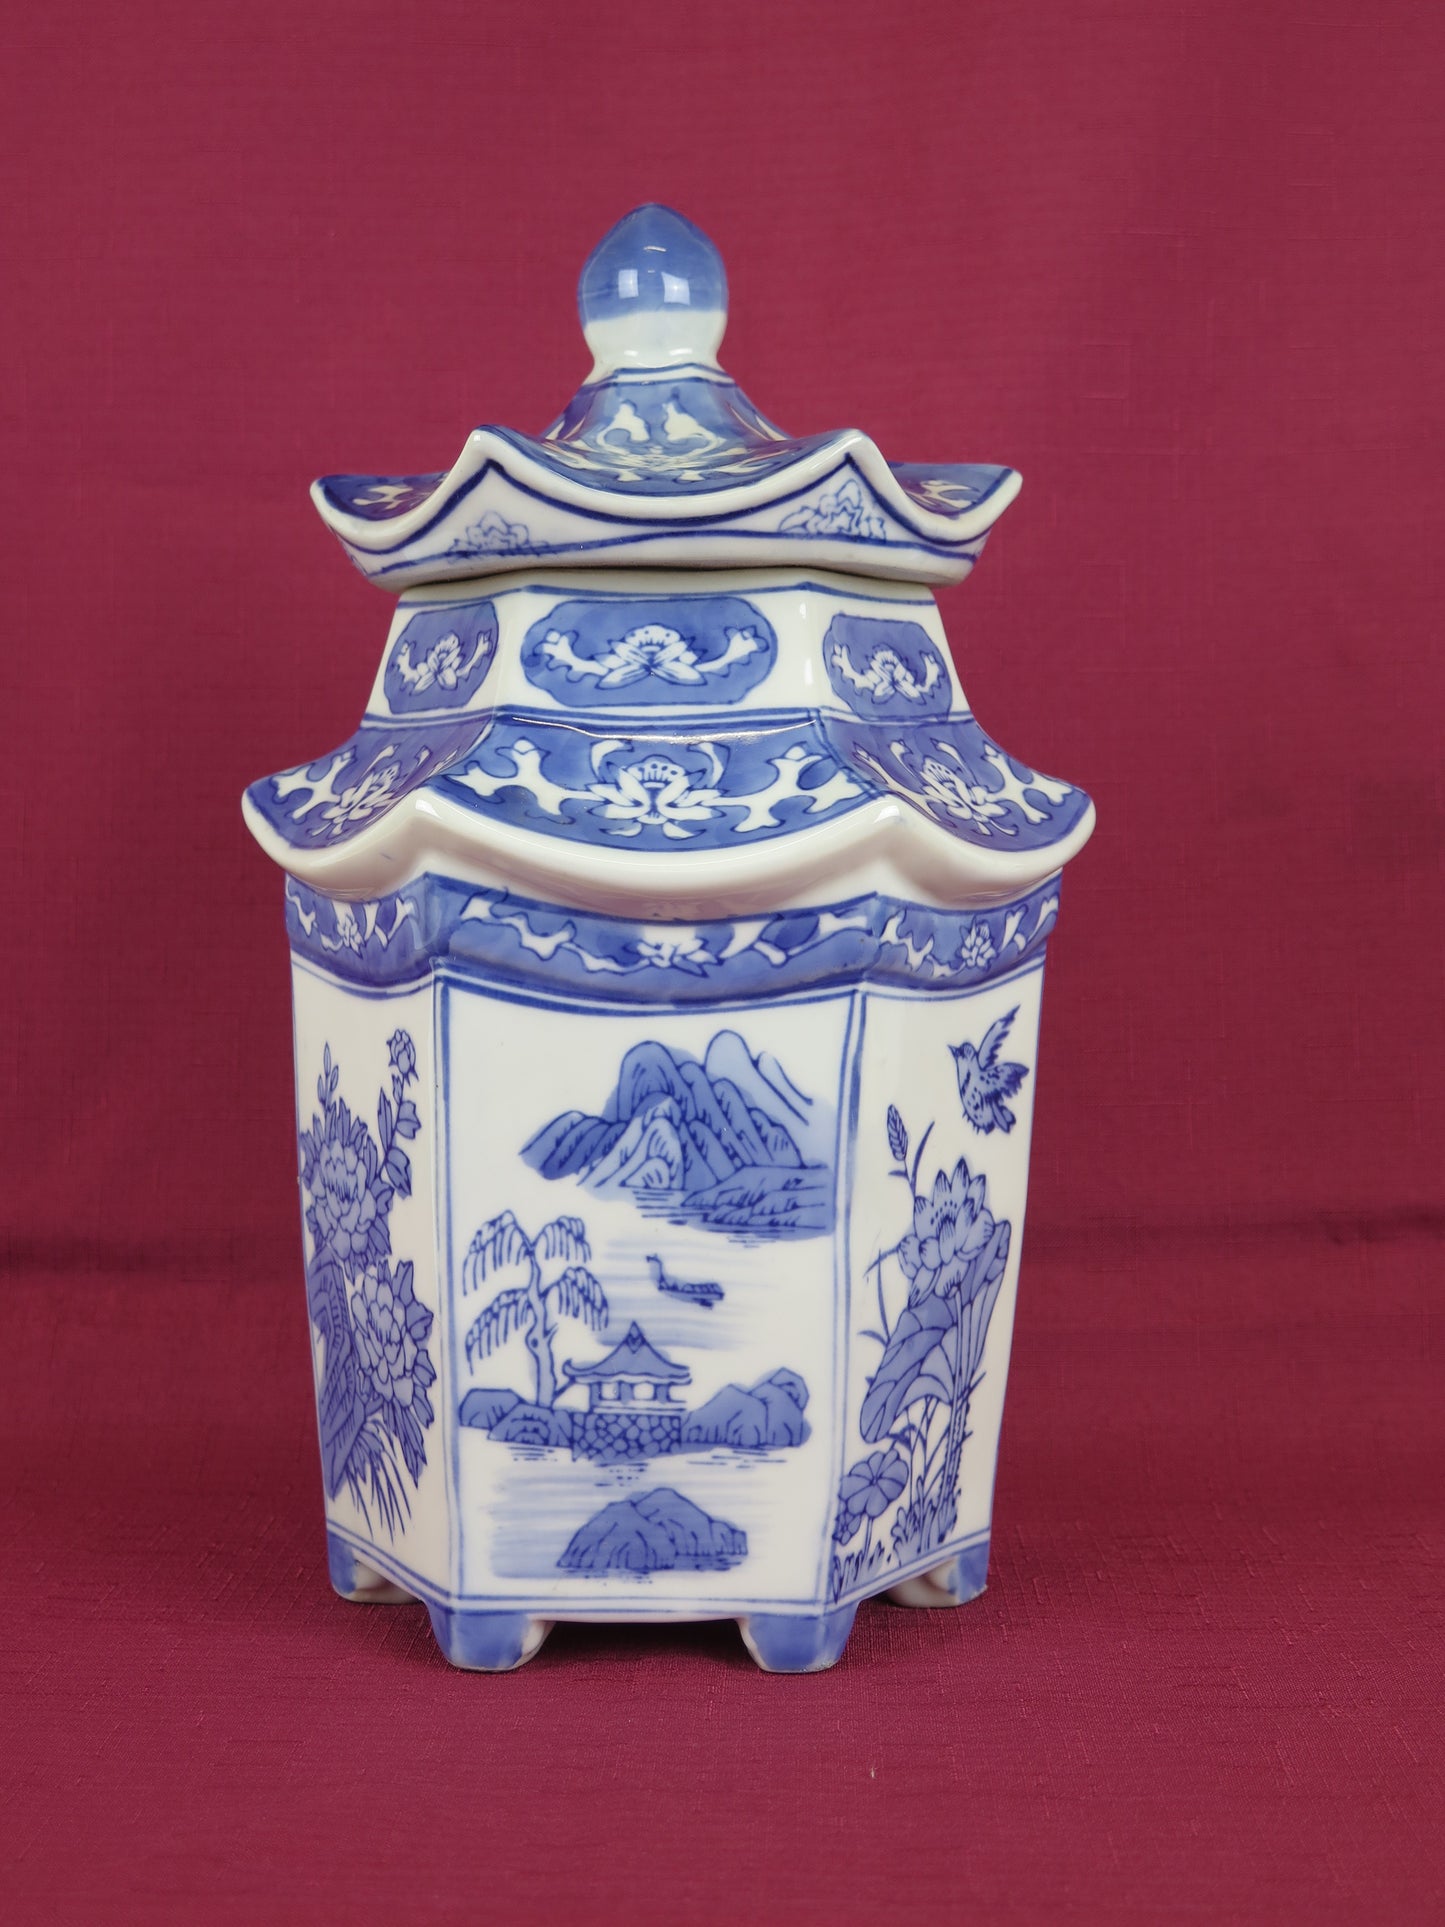 Vintage Chinese collectible ceramic vase china white blue hand painted CM4